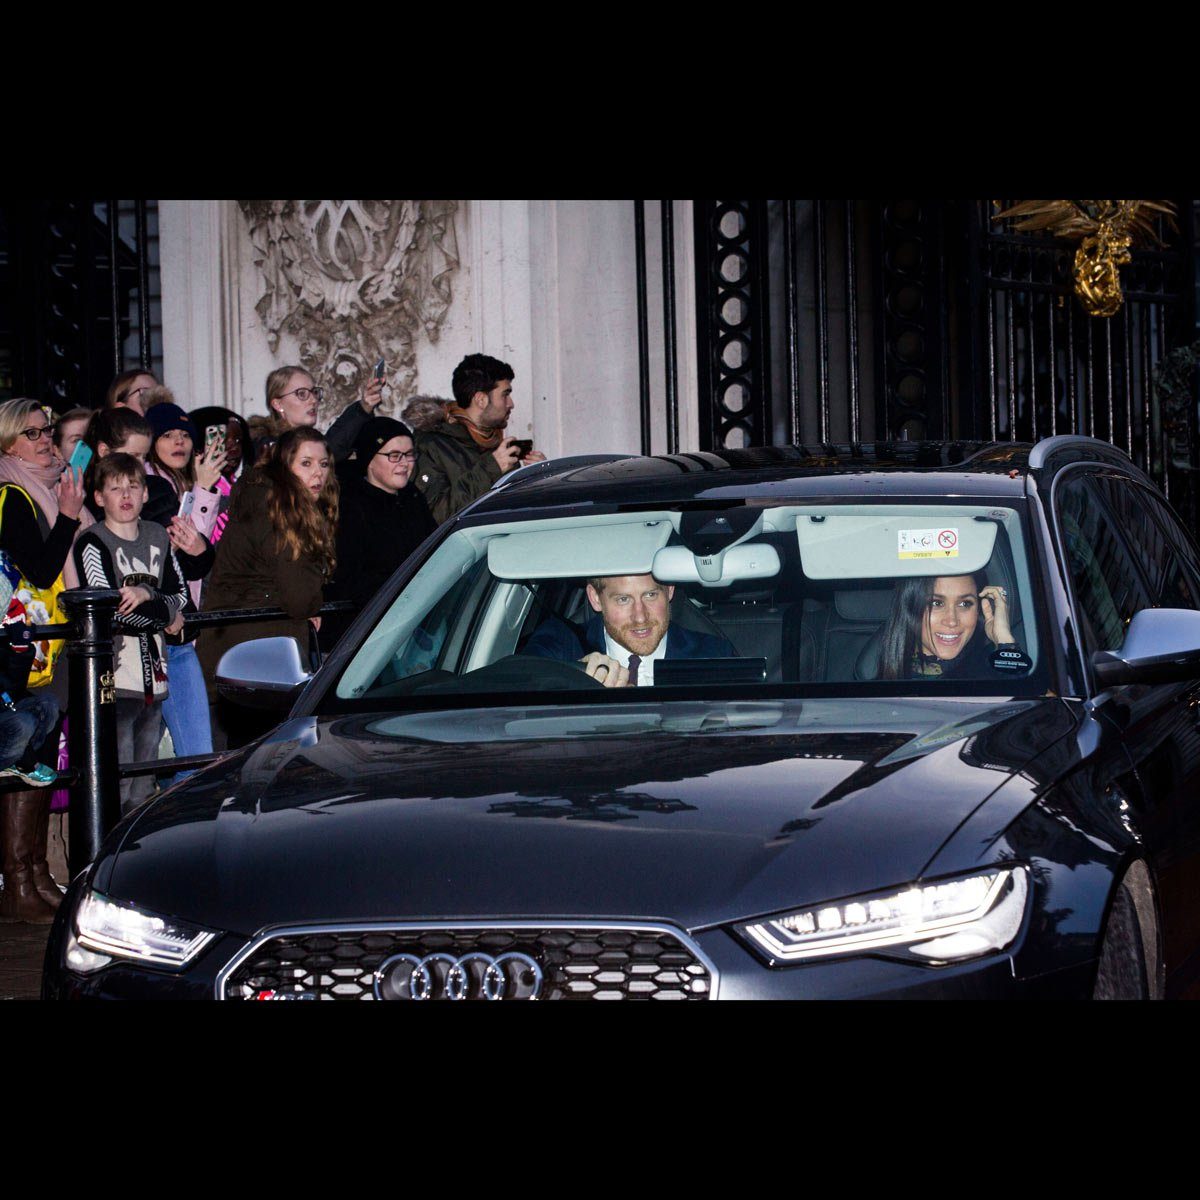 Prince Harry and Meghan Markle in an Audi